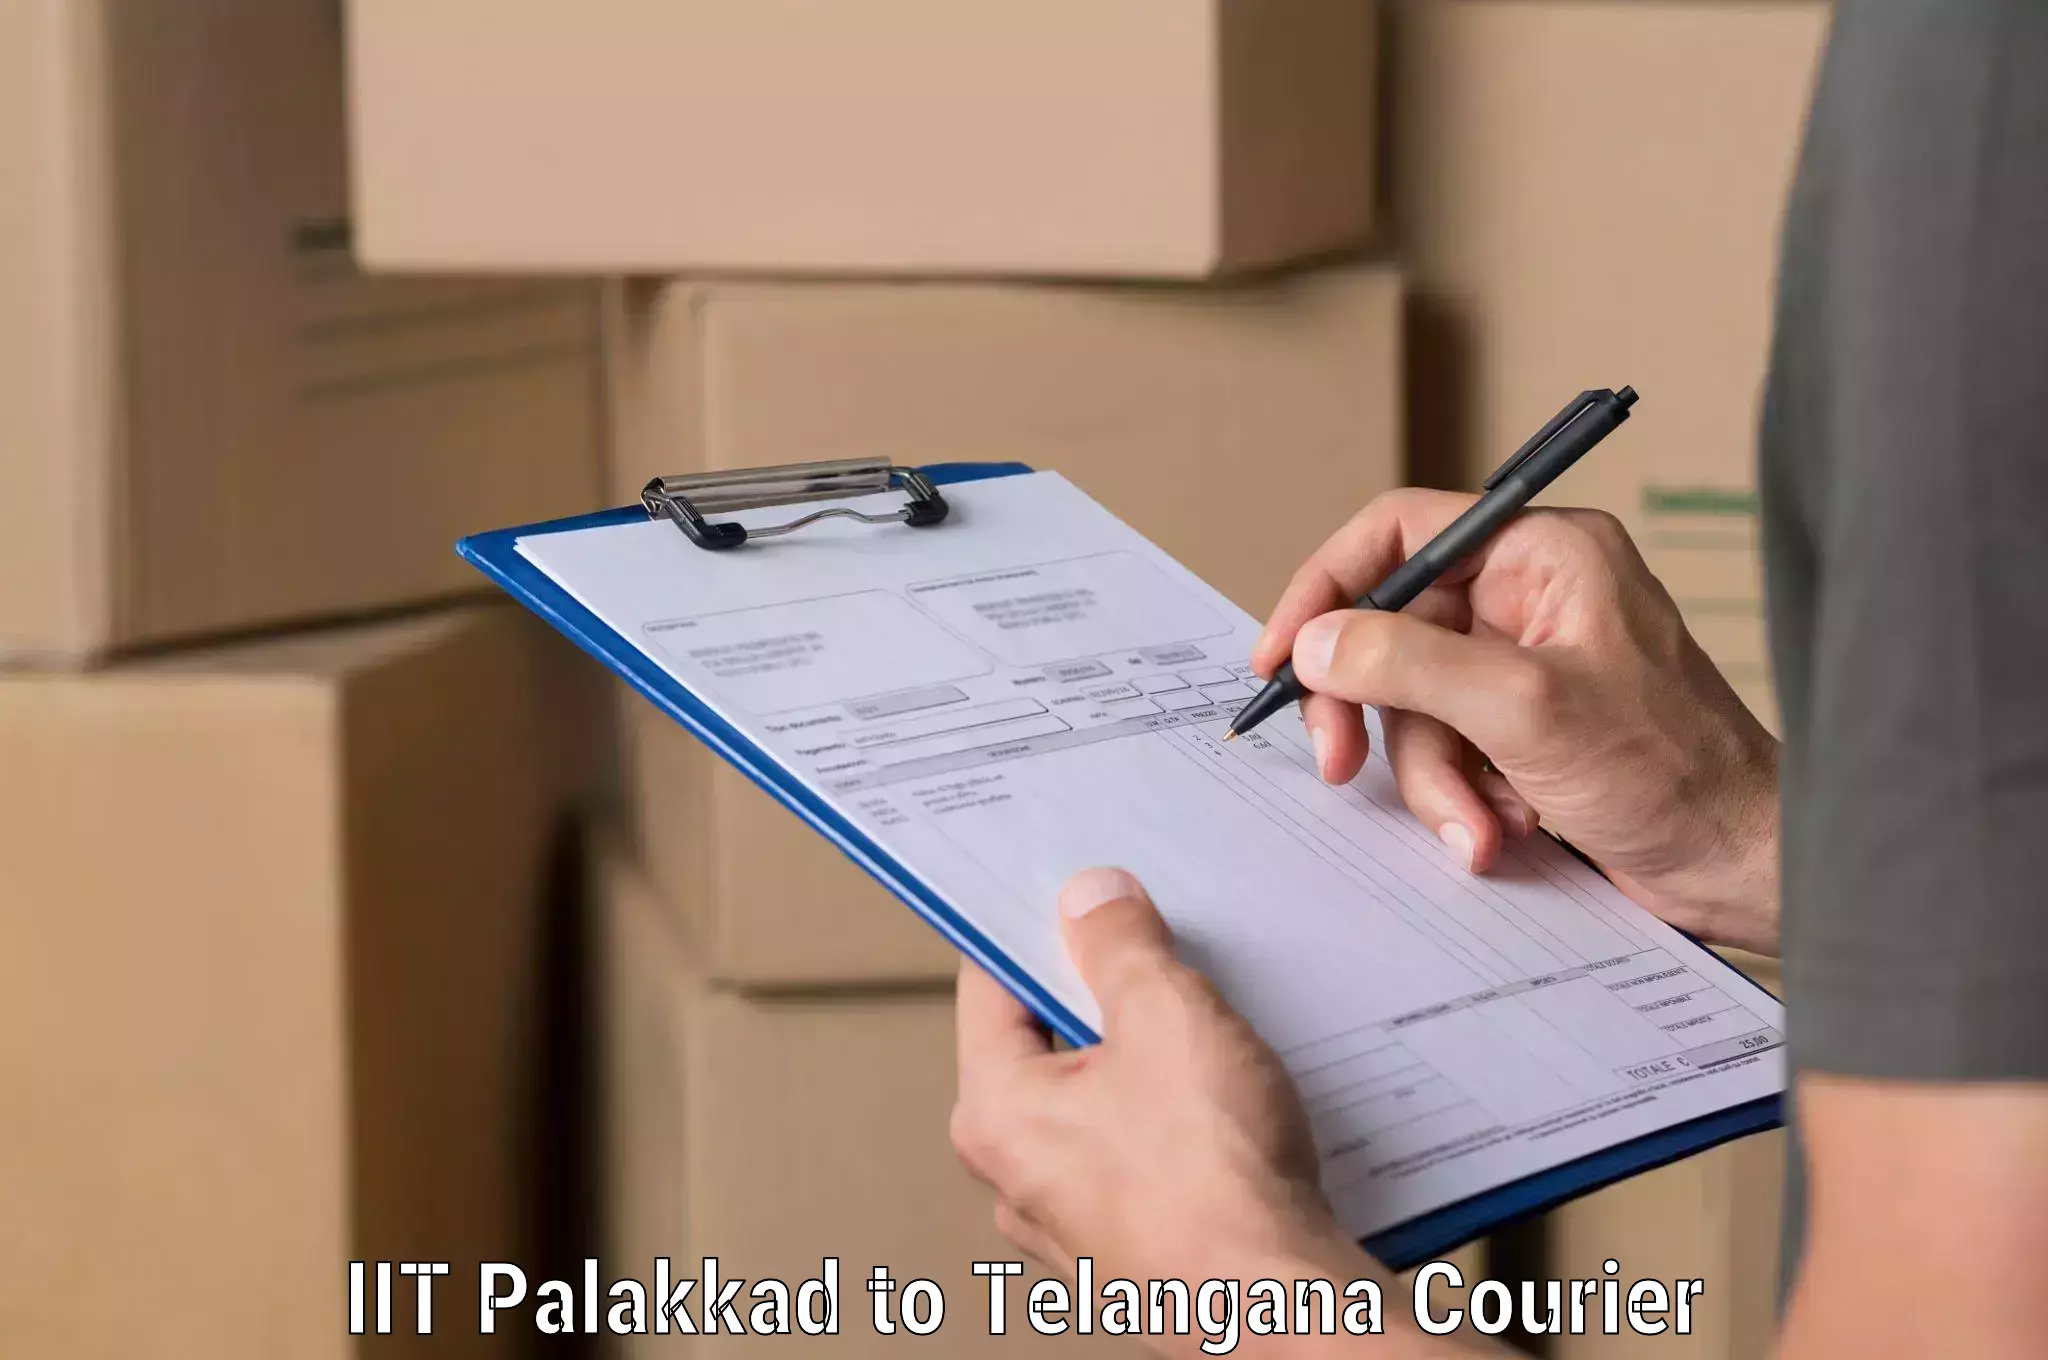 Courier service booking IIT Palakkad to Navipet